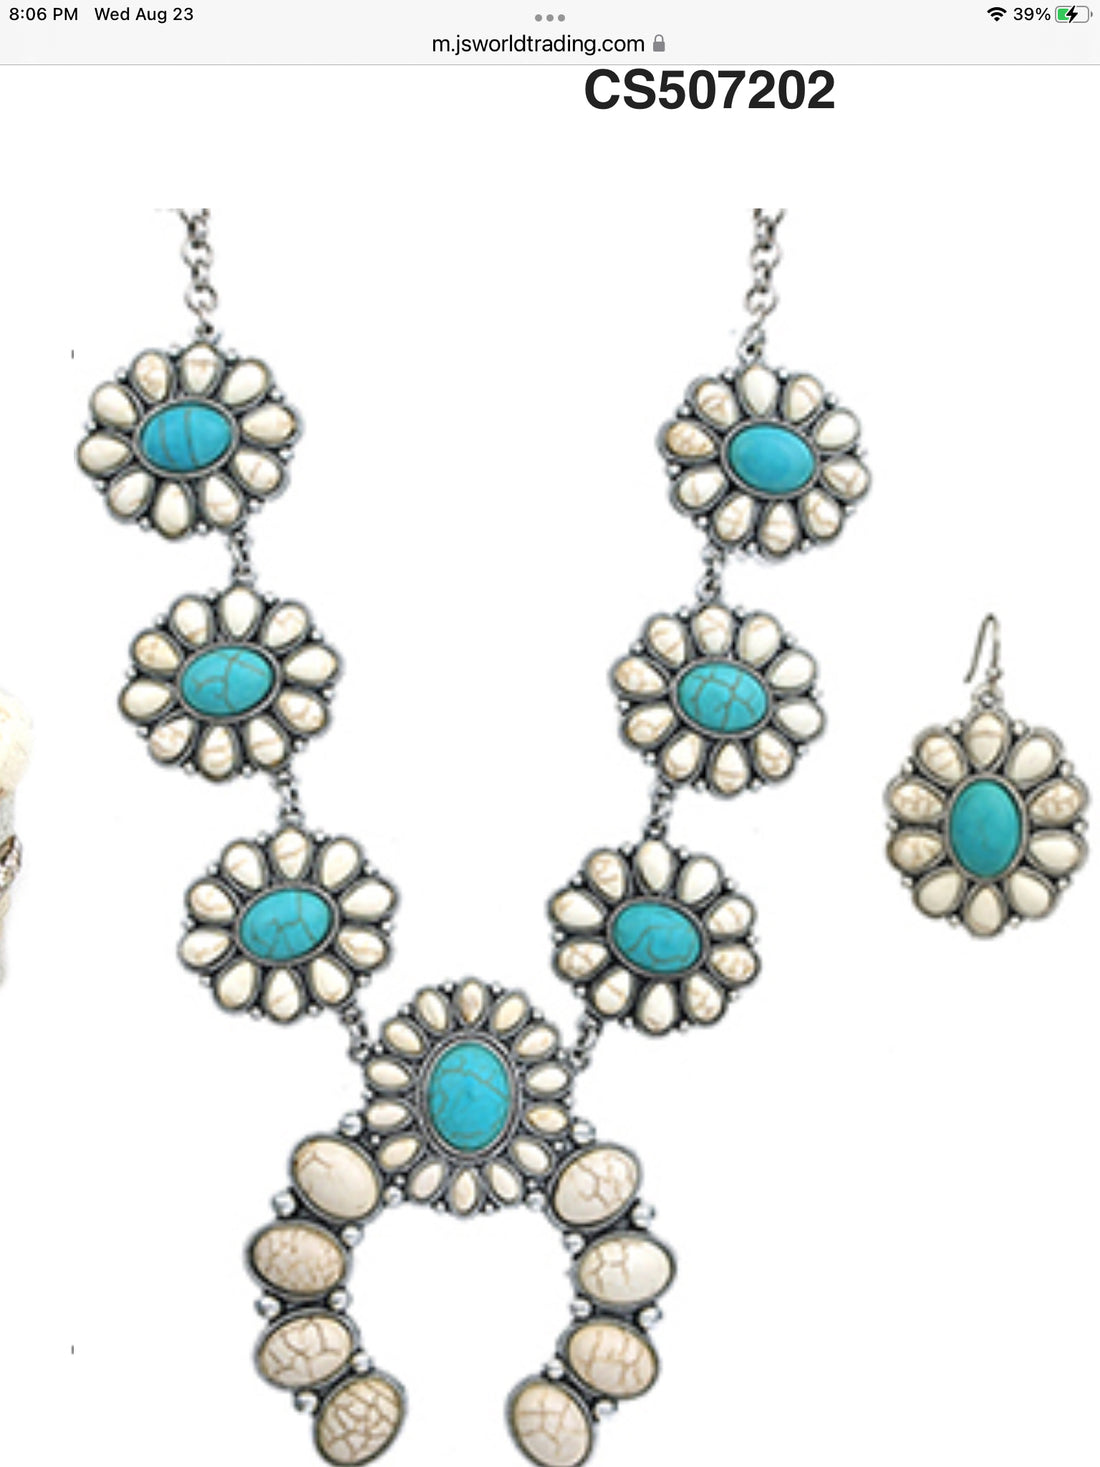 Turquoise and White Hematite Floral Squash Blossom Necklace with Matching Earrings